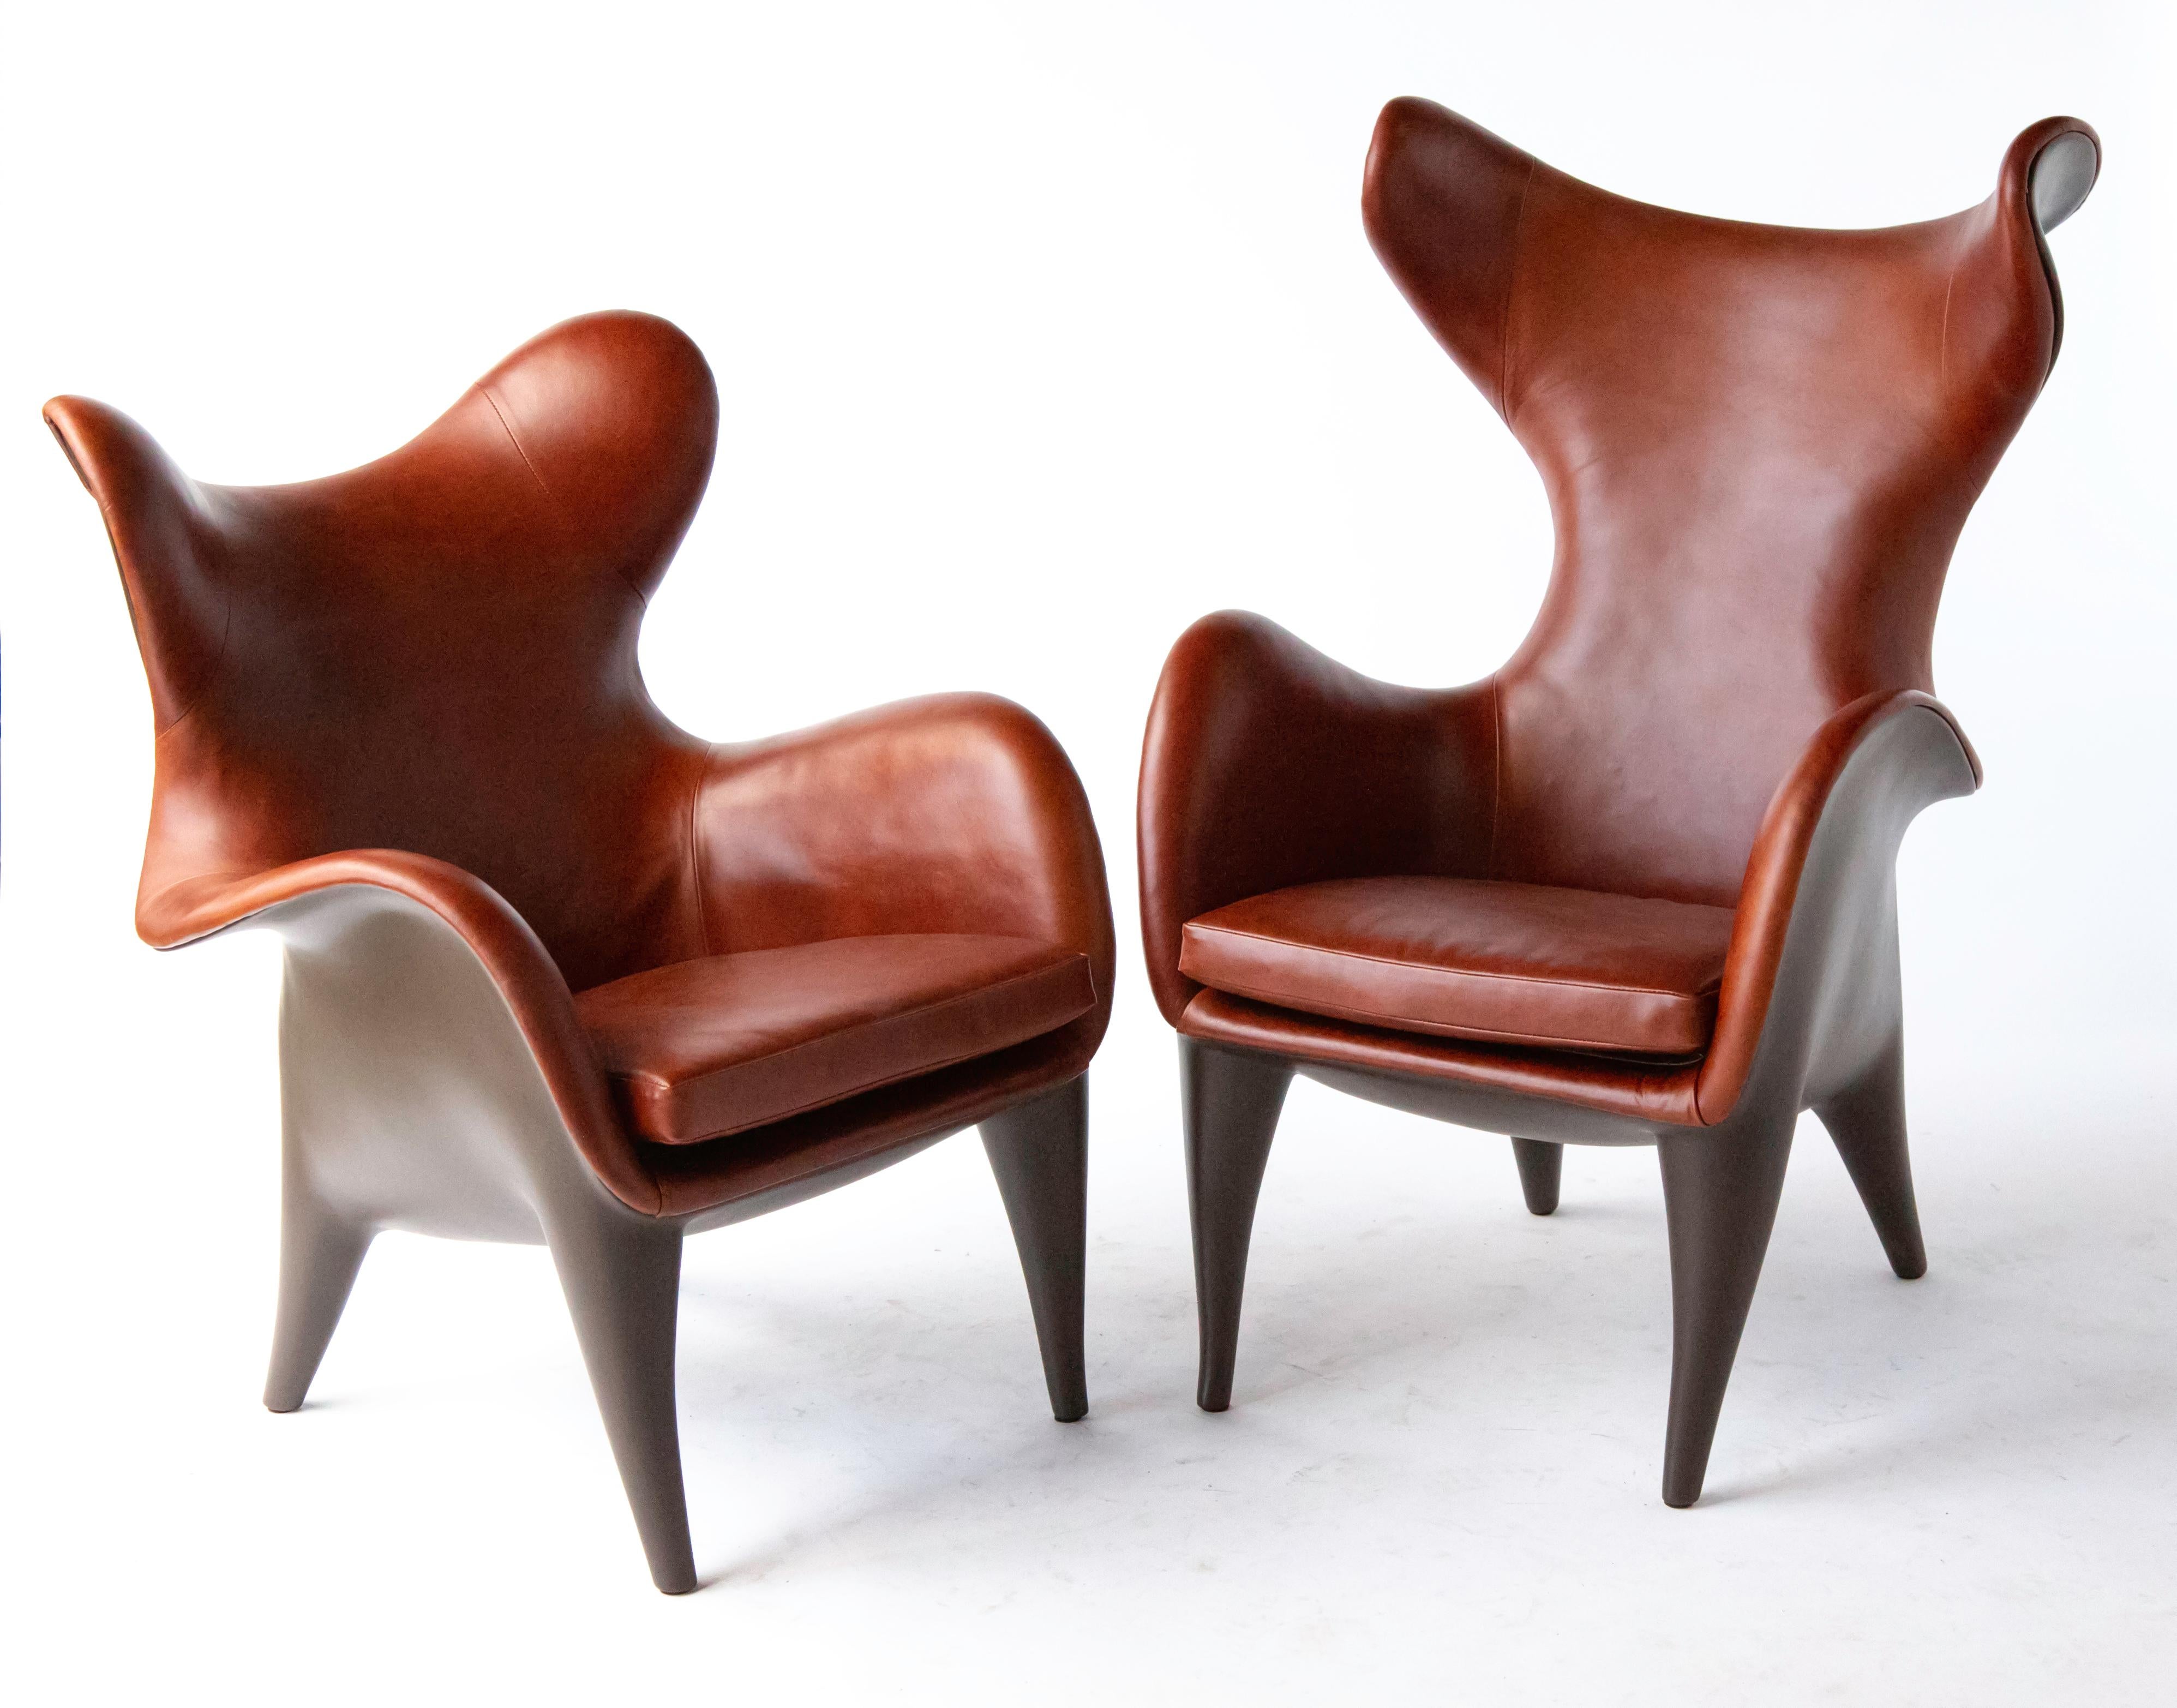 Hand-Crafted Frankie Wingback Chair/ Lounge Chair, Leather & Resin, Jordan Mozer, USA, 2018 For Sale